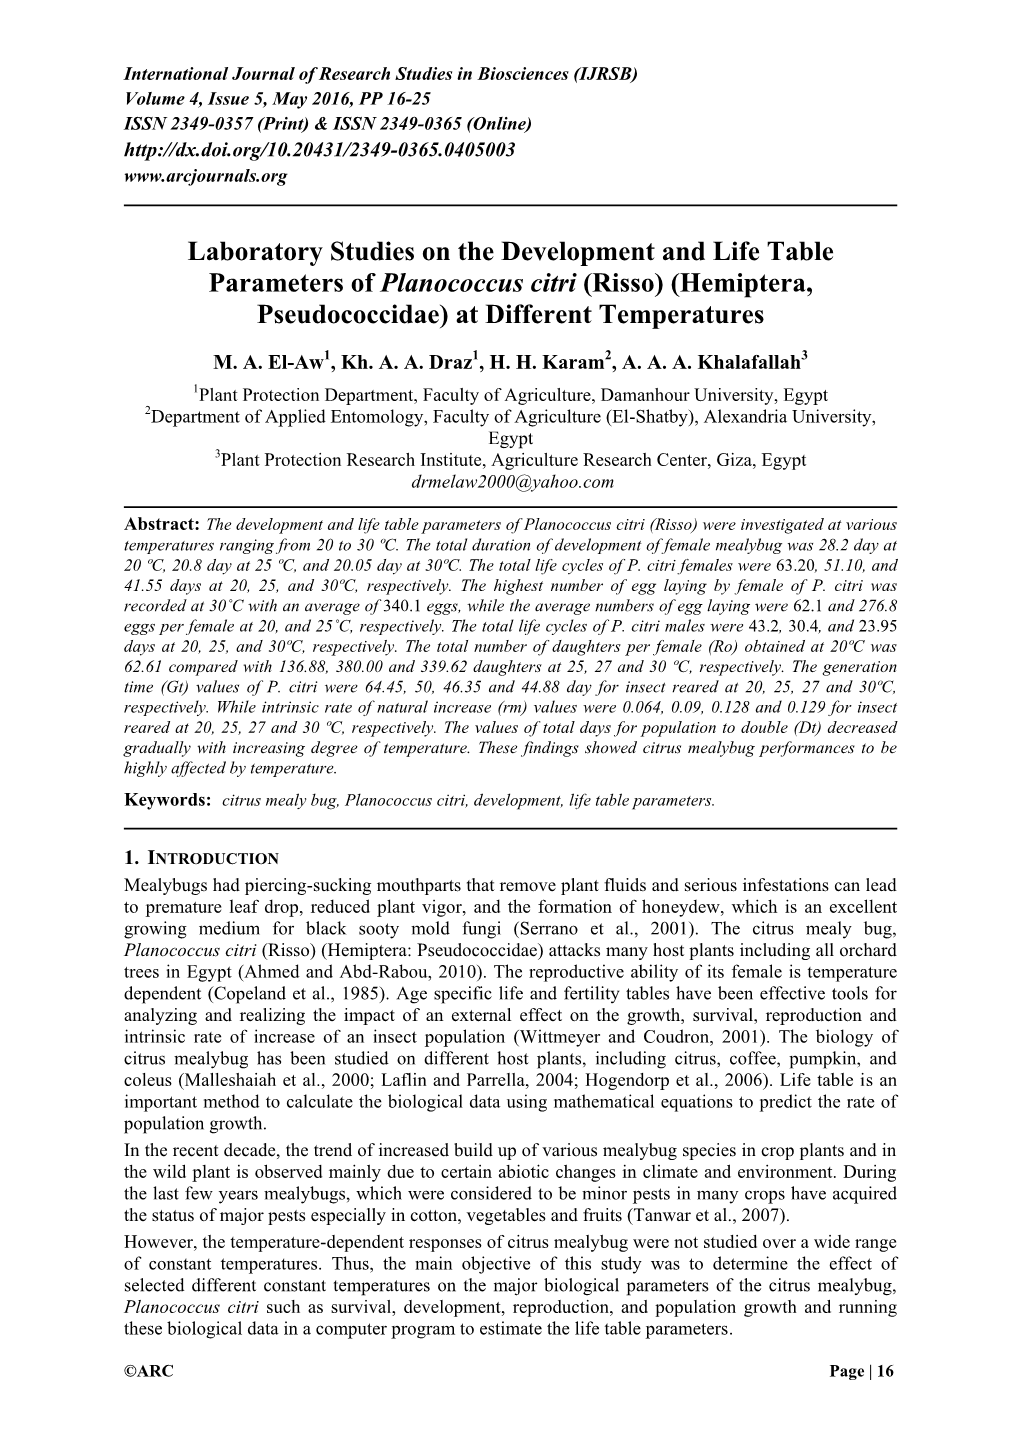 Laboratory Studies on the Development and Life Table Parameters of Planococcus Citri (Risso) (Hemiptera, Pseudococcidae) at Different Temperatures